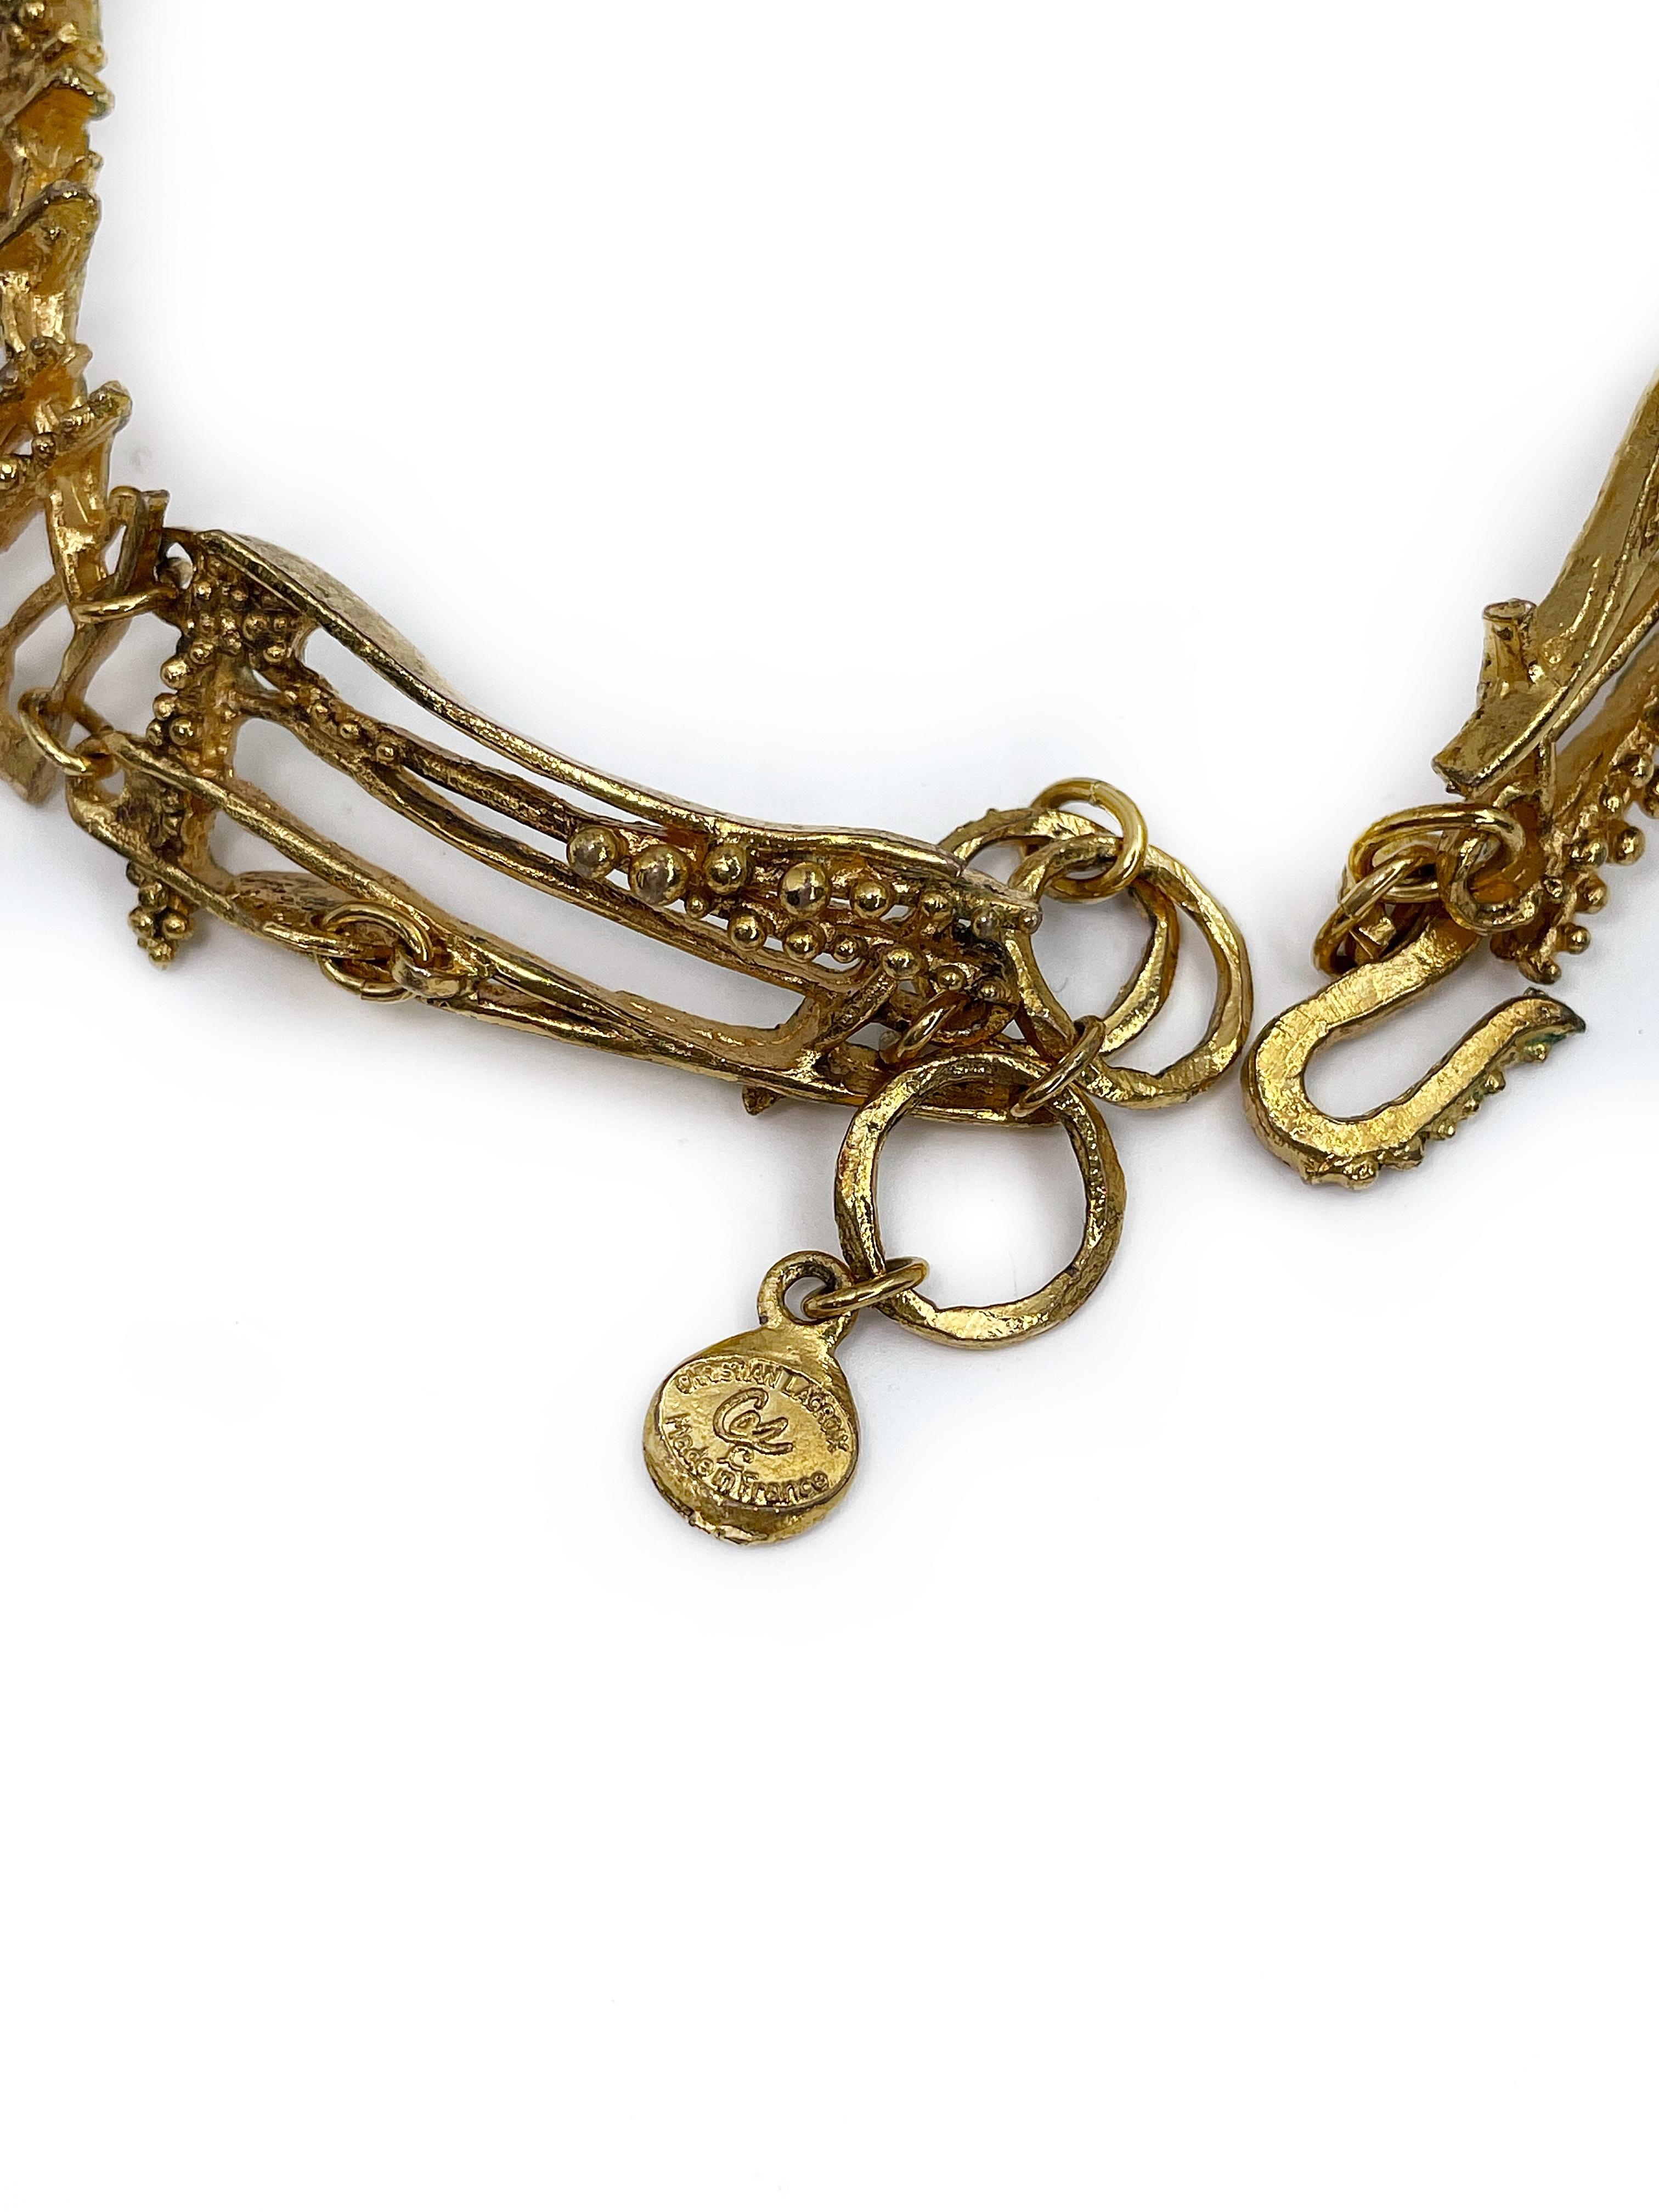 Modern 1990s Vintage Christian Lacroix Gold Tone Openwork Crystal Coin Choker Necklace